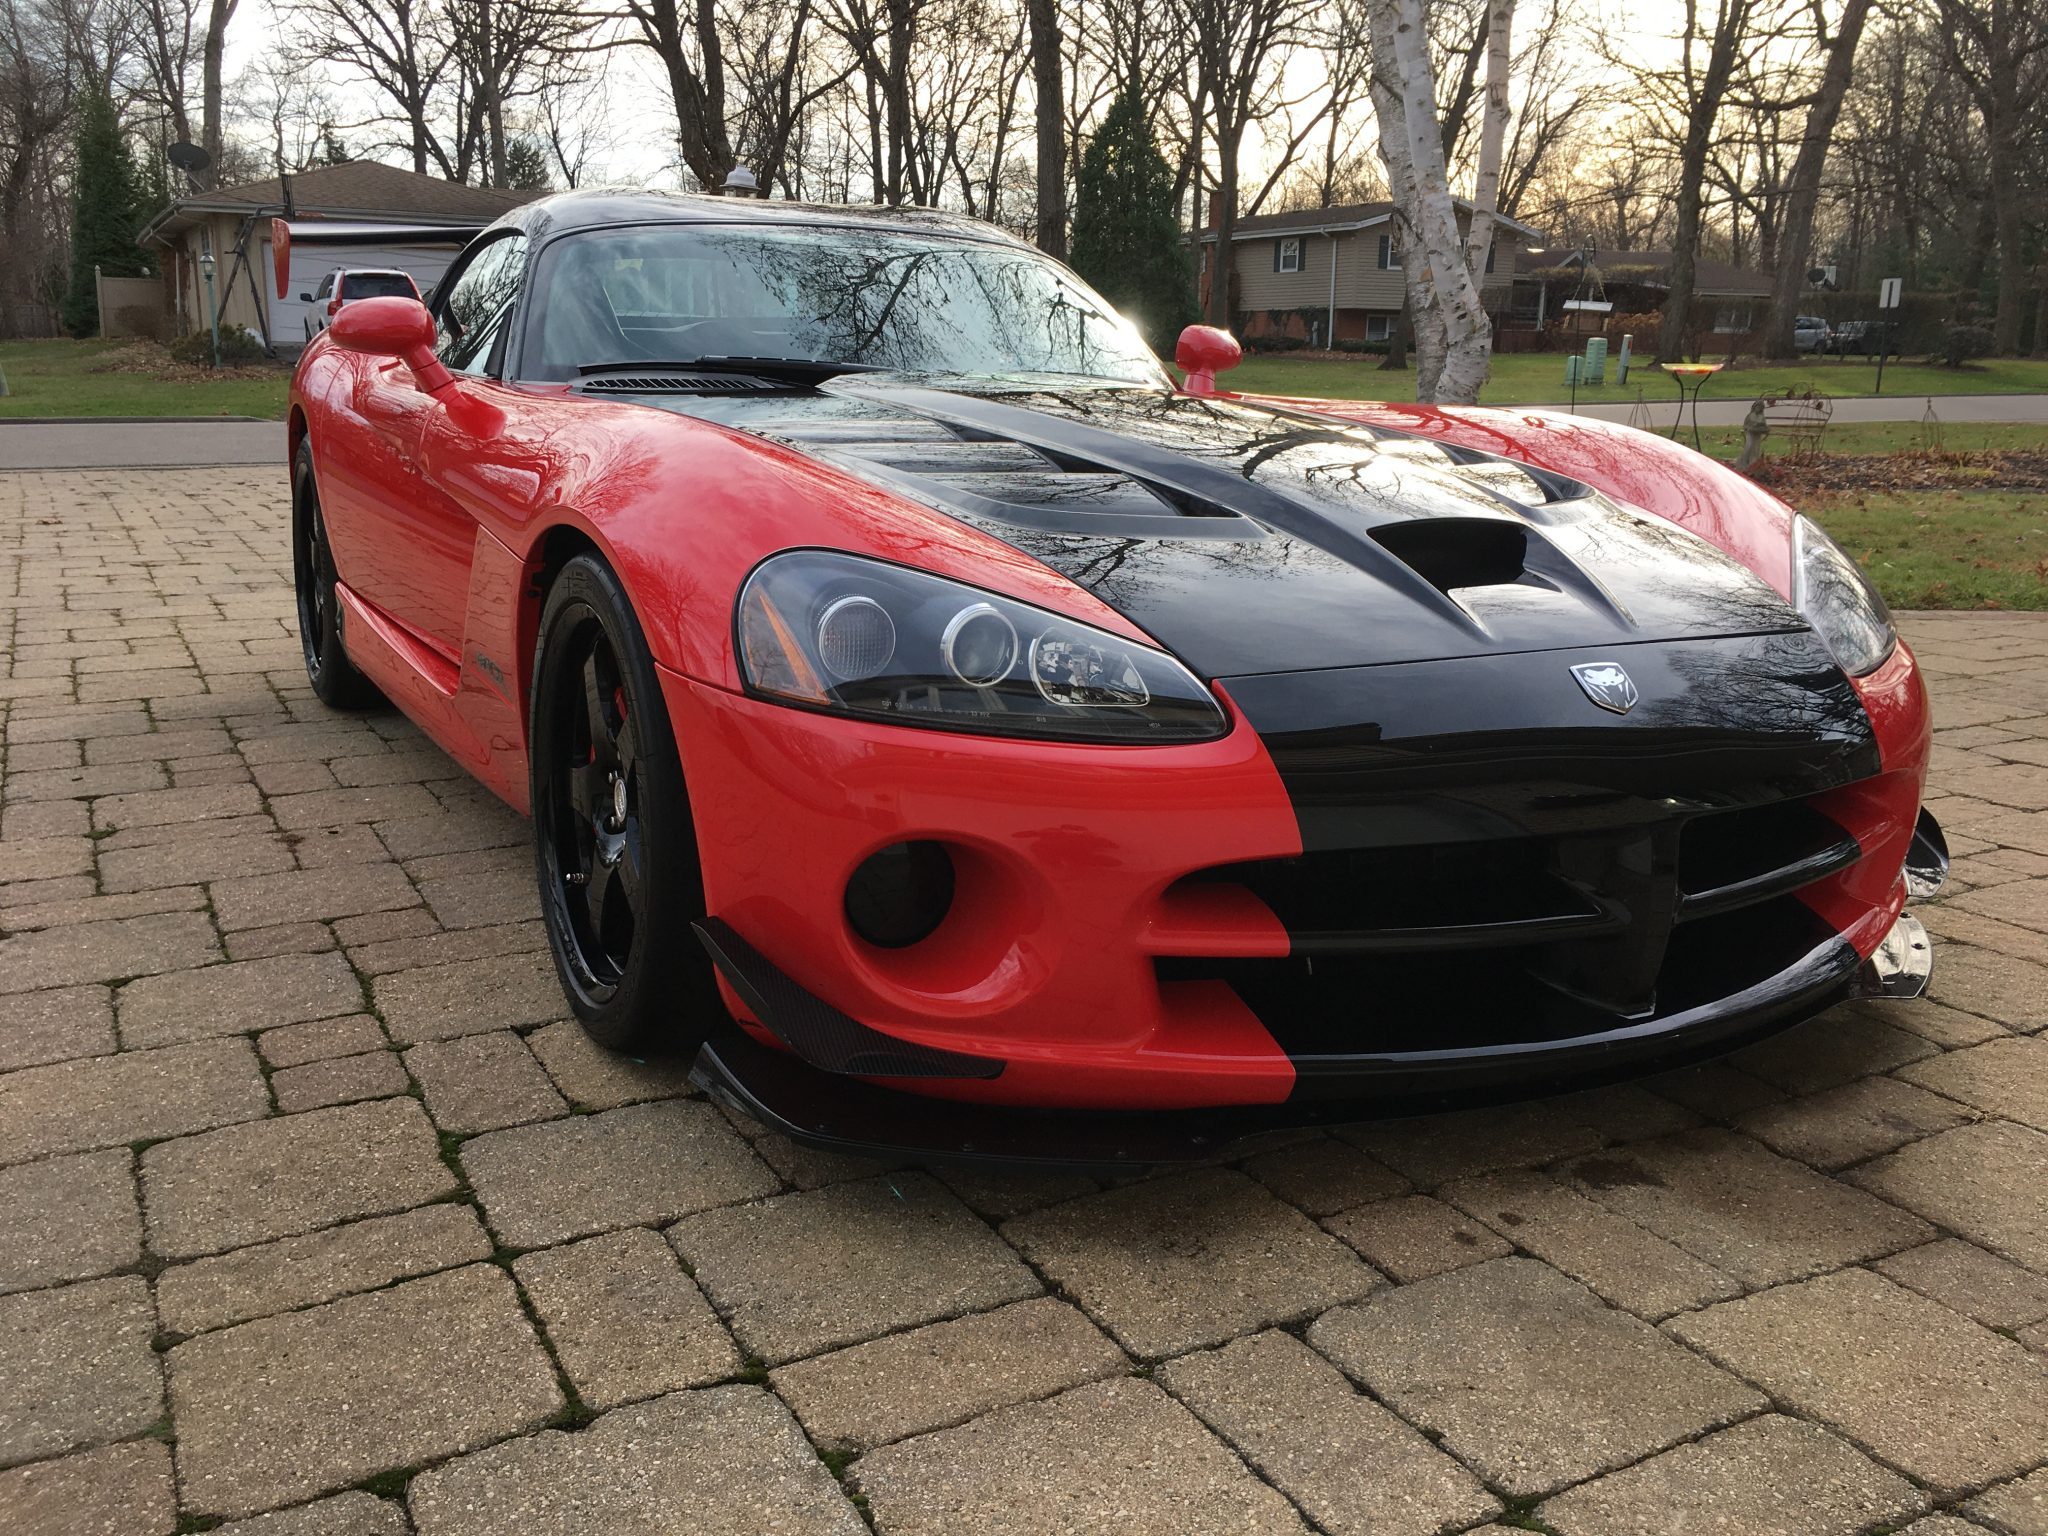 Go To The Track With This Low Mileage 08 Dodge Viper Acr Carscoops